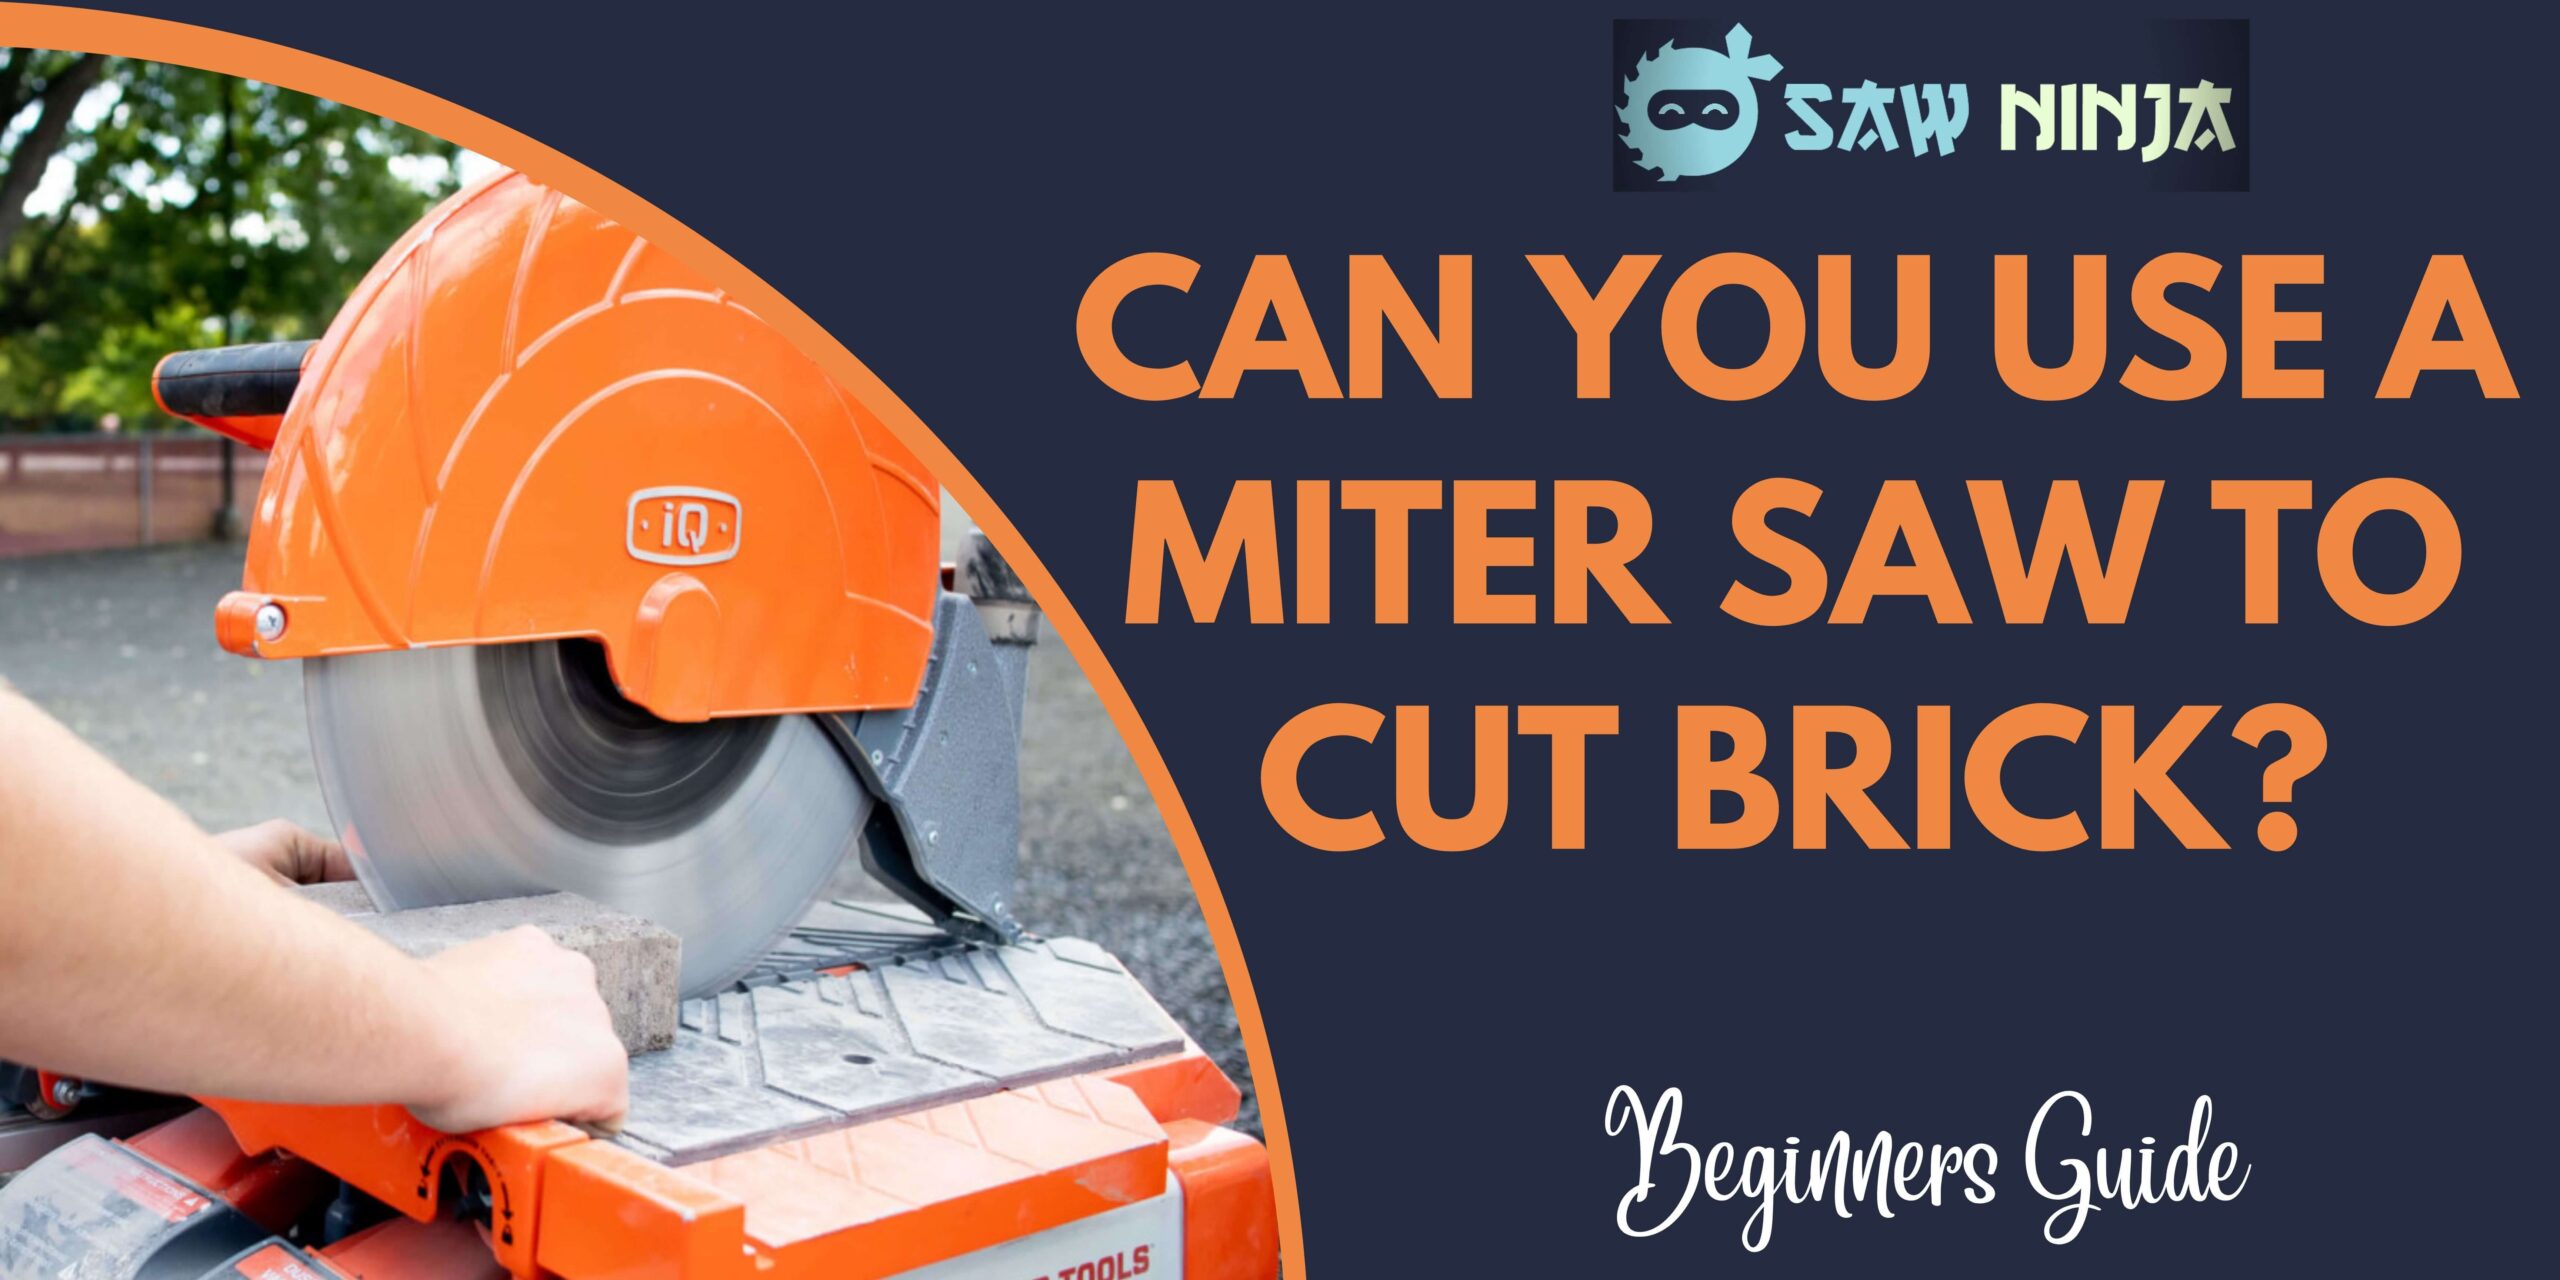 Can You Use a Miter Saw to Cut Brick